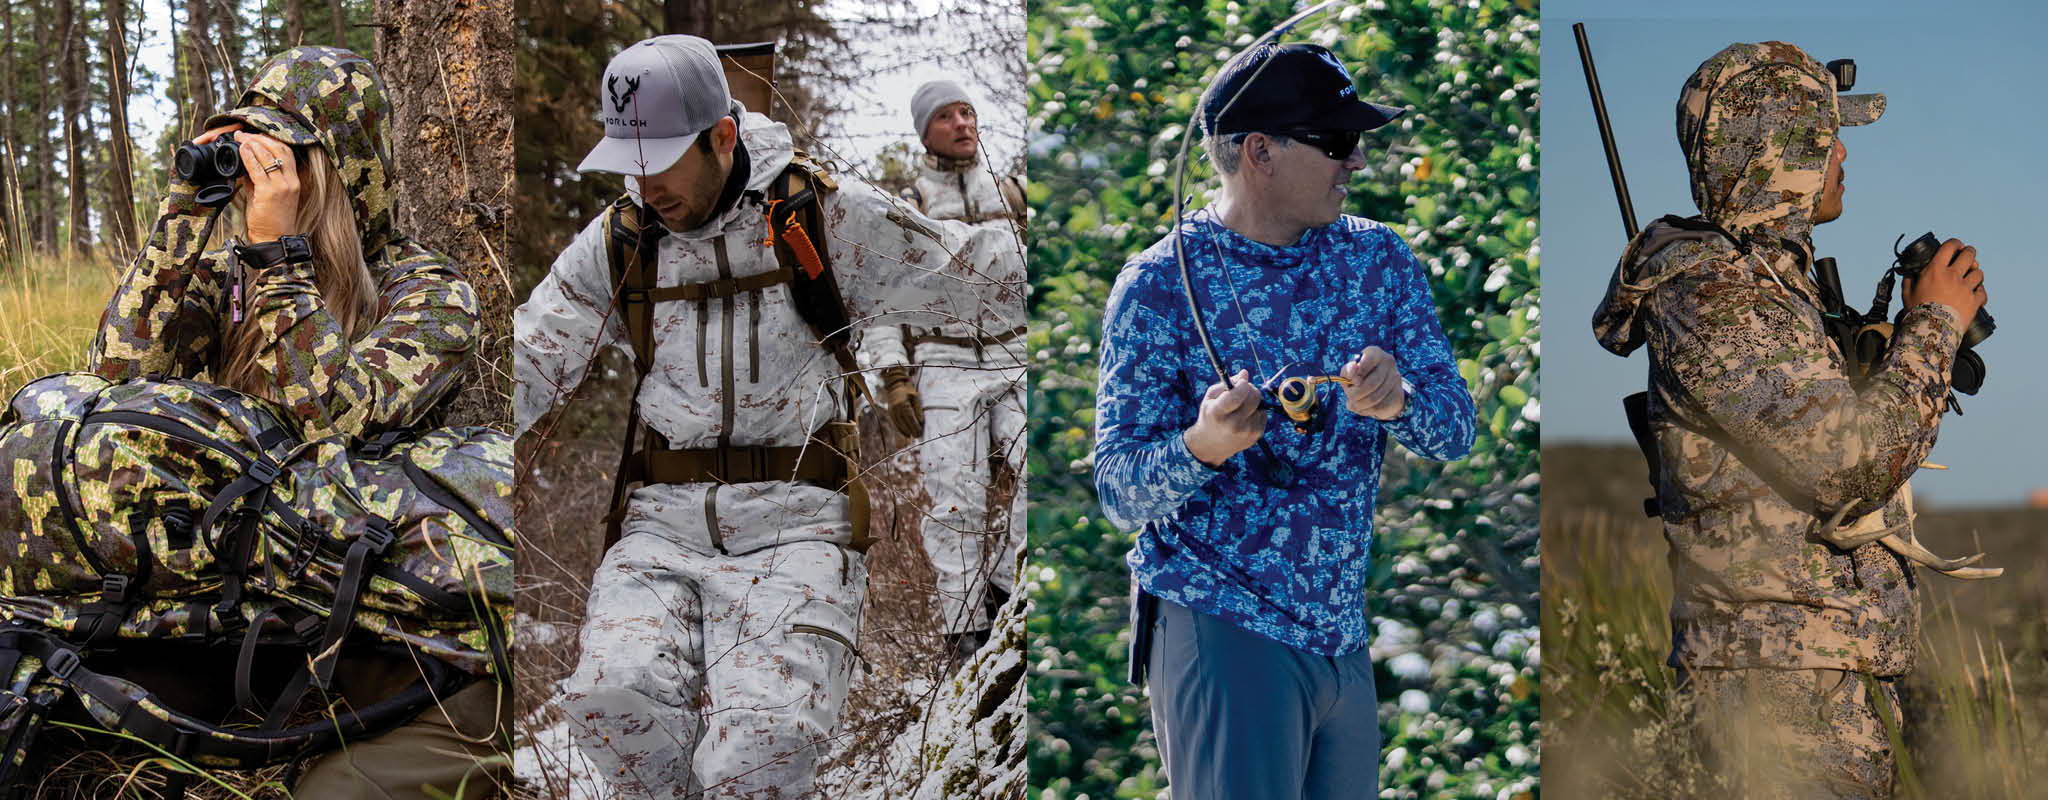 FORLOH Camo  Camouflage Clothing For Any Environment